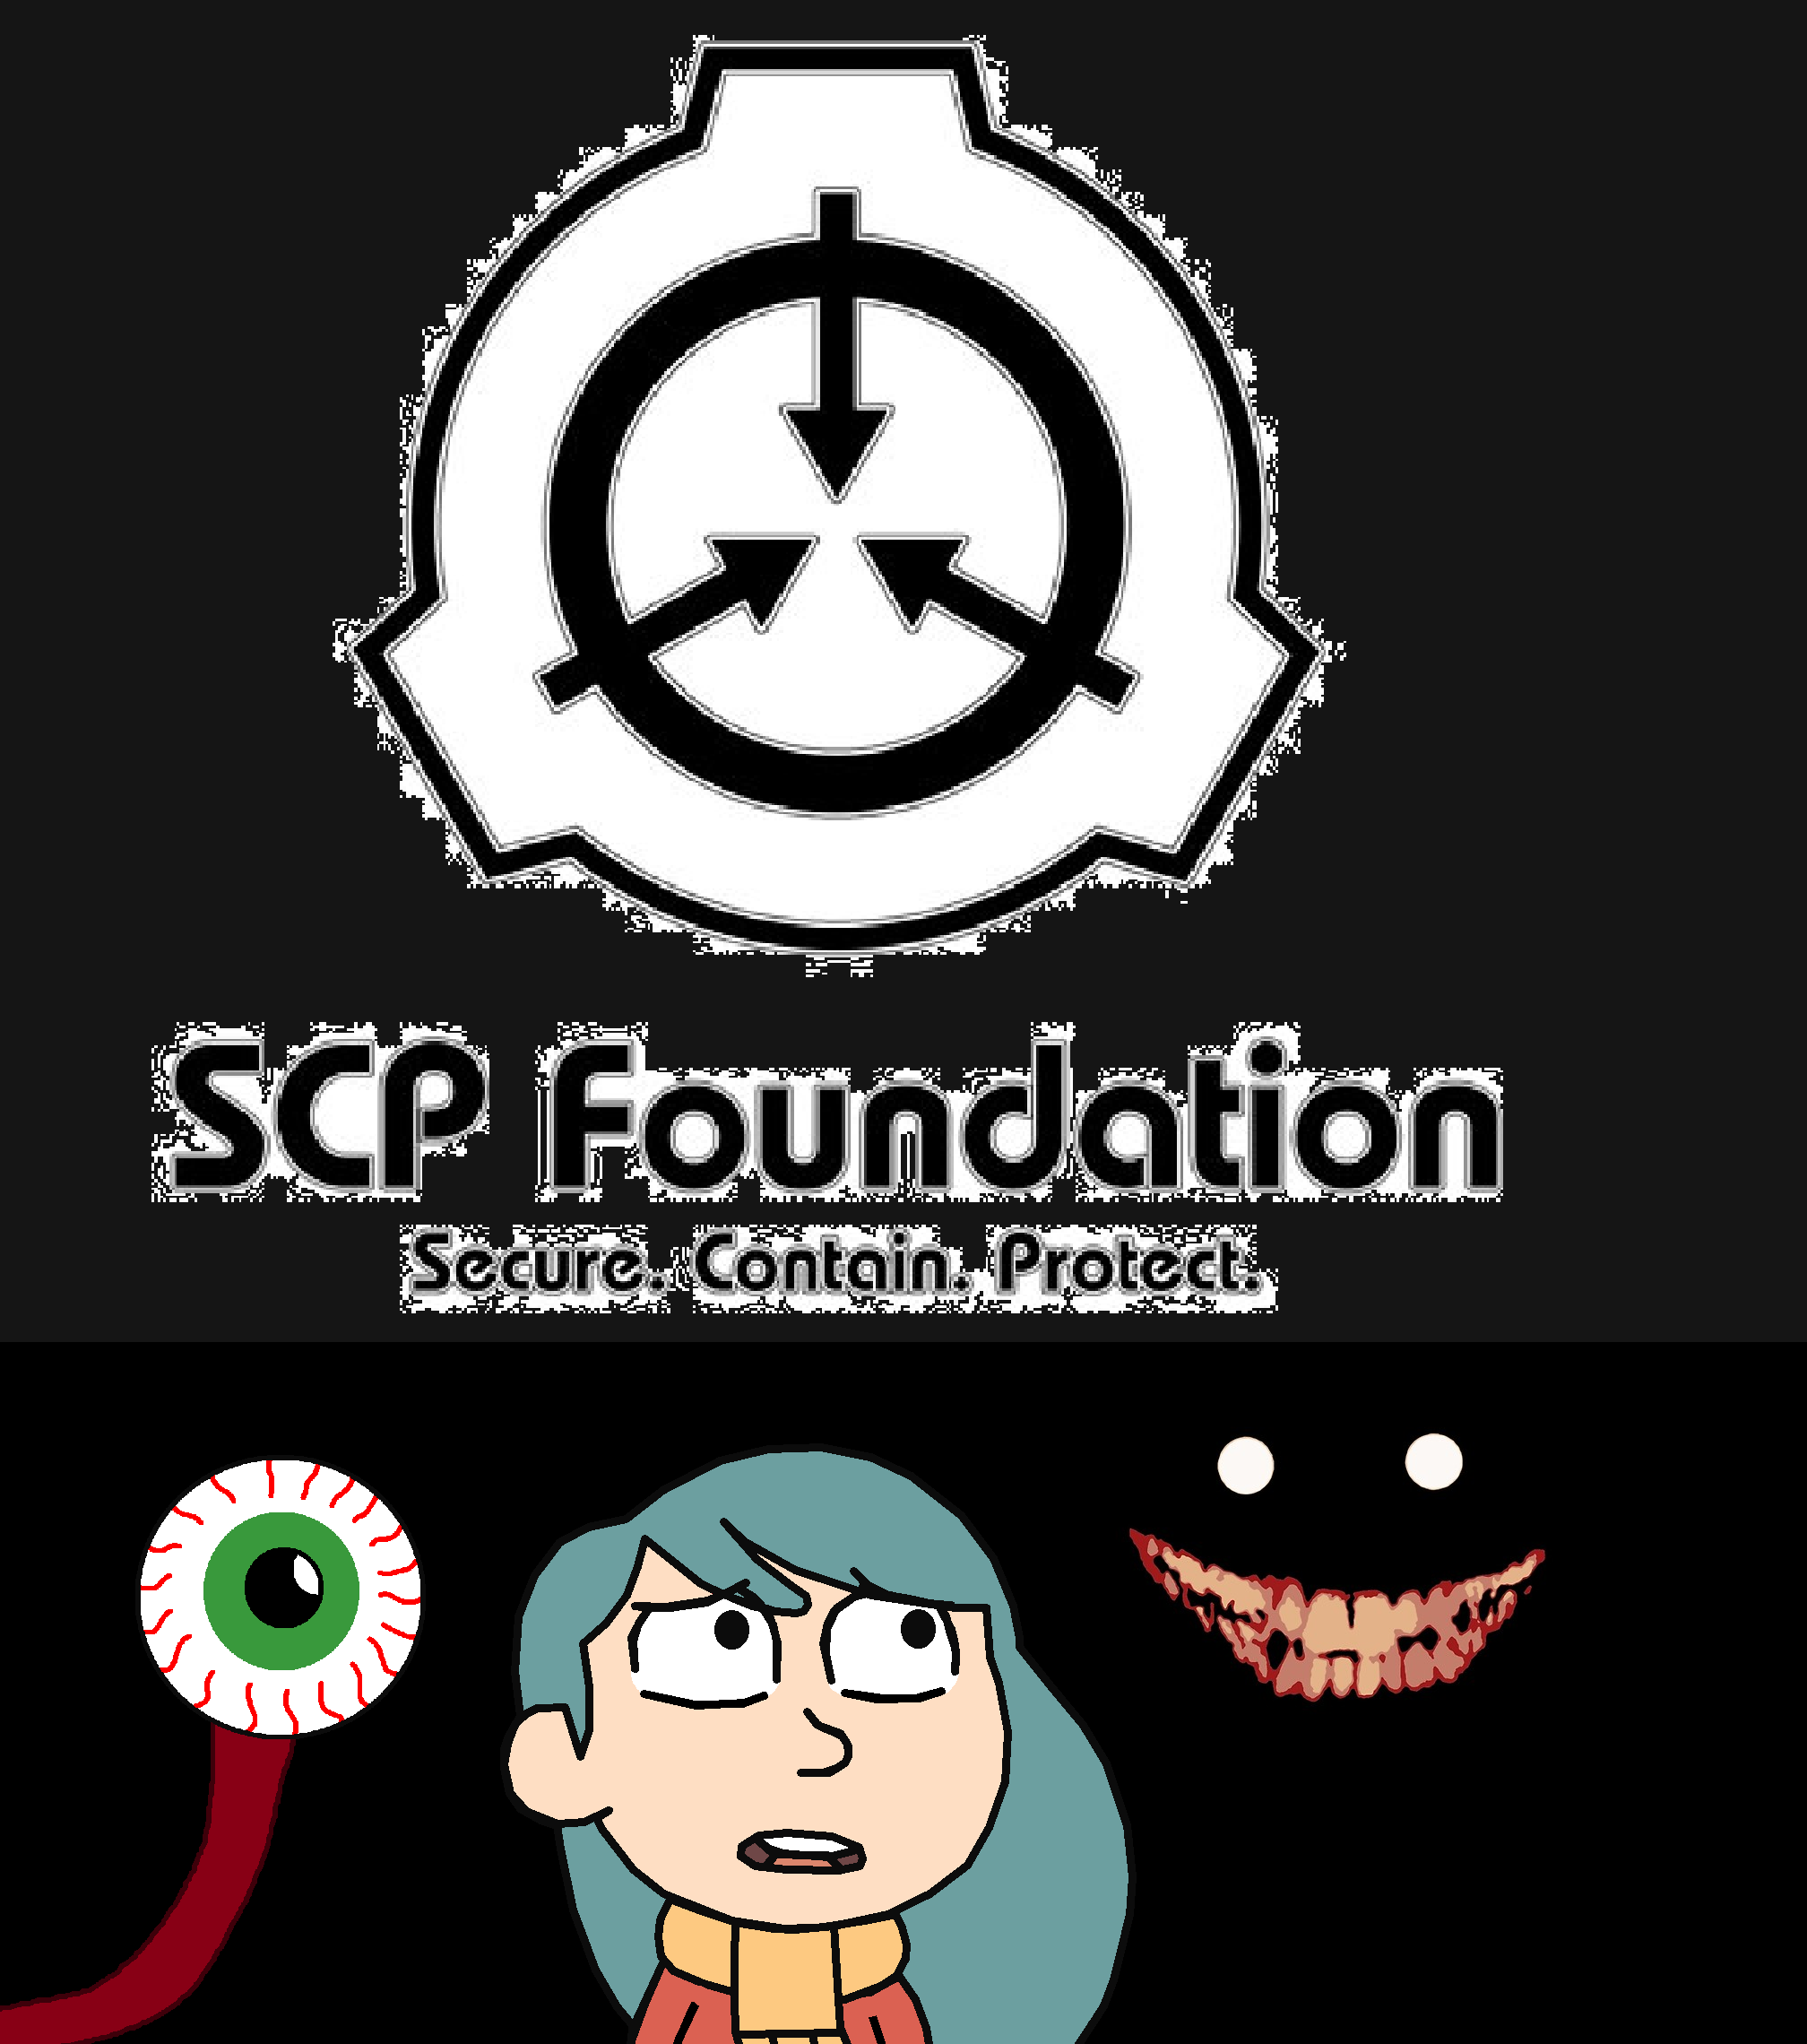 SCP Foundation Site Security by DontForgetJeff on DeviantArt